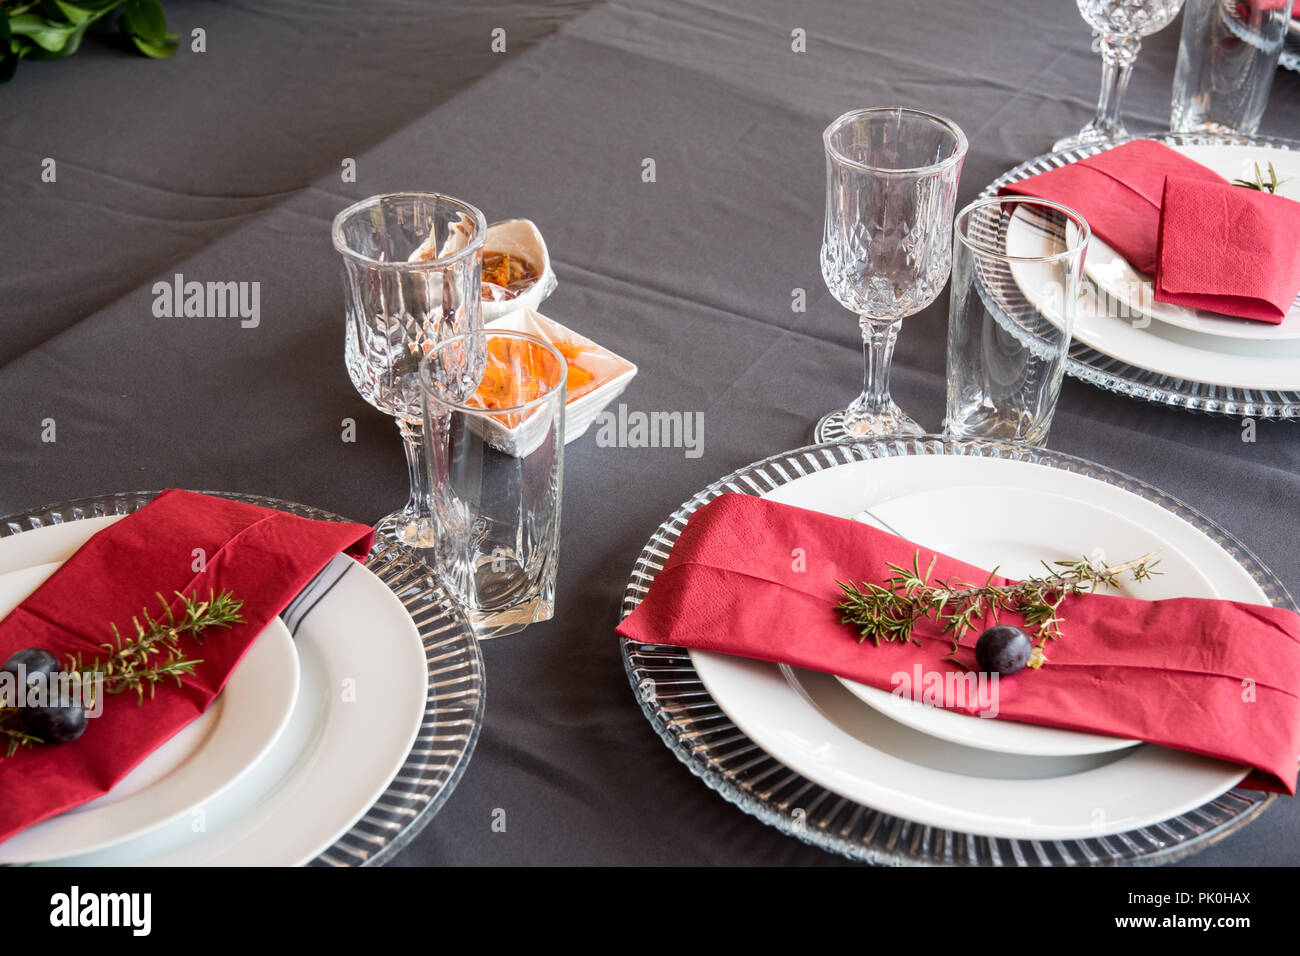 A lunch table set with under plates, lovely grey and white plates, red serviette, small decorative tree branch, two grapes with floral and fruit decor Stock Photo